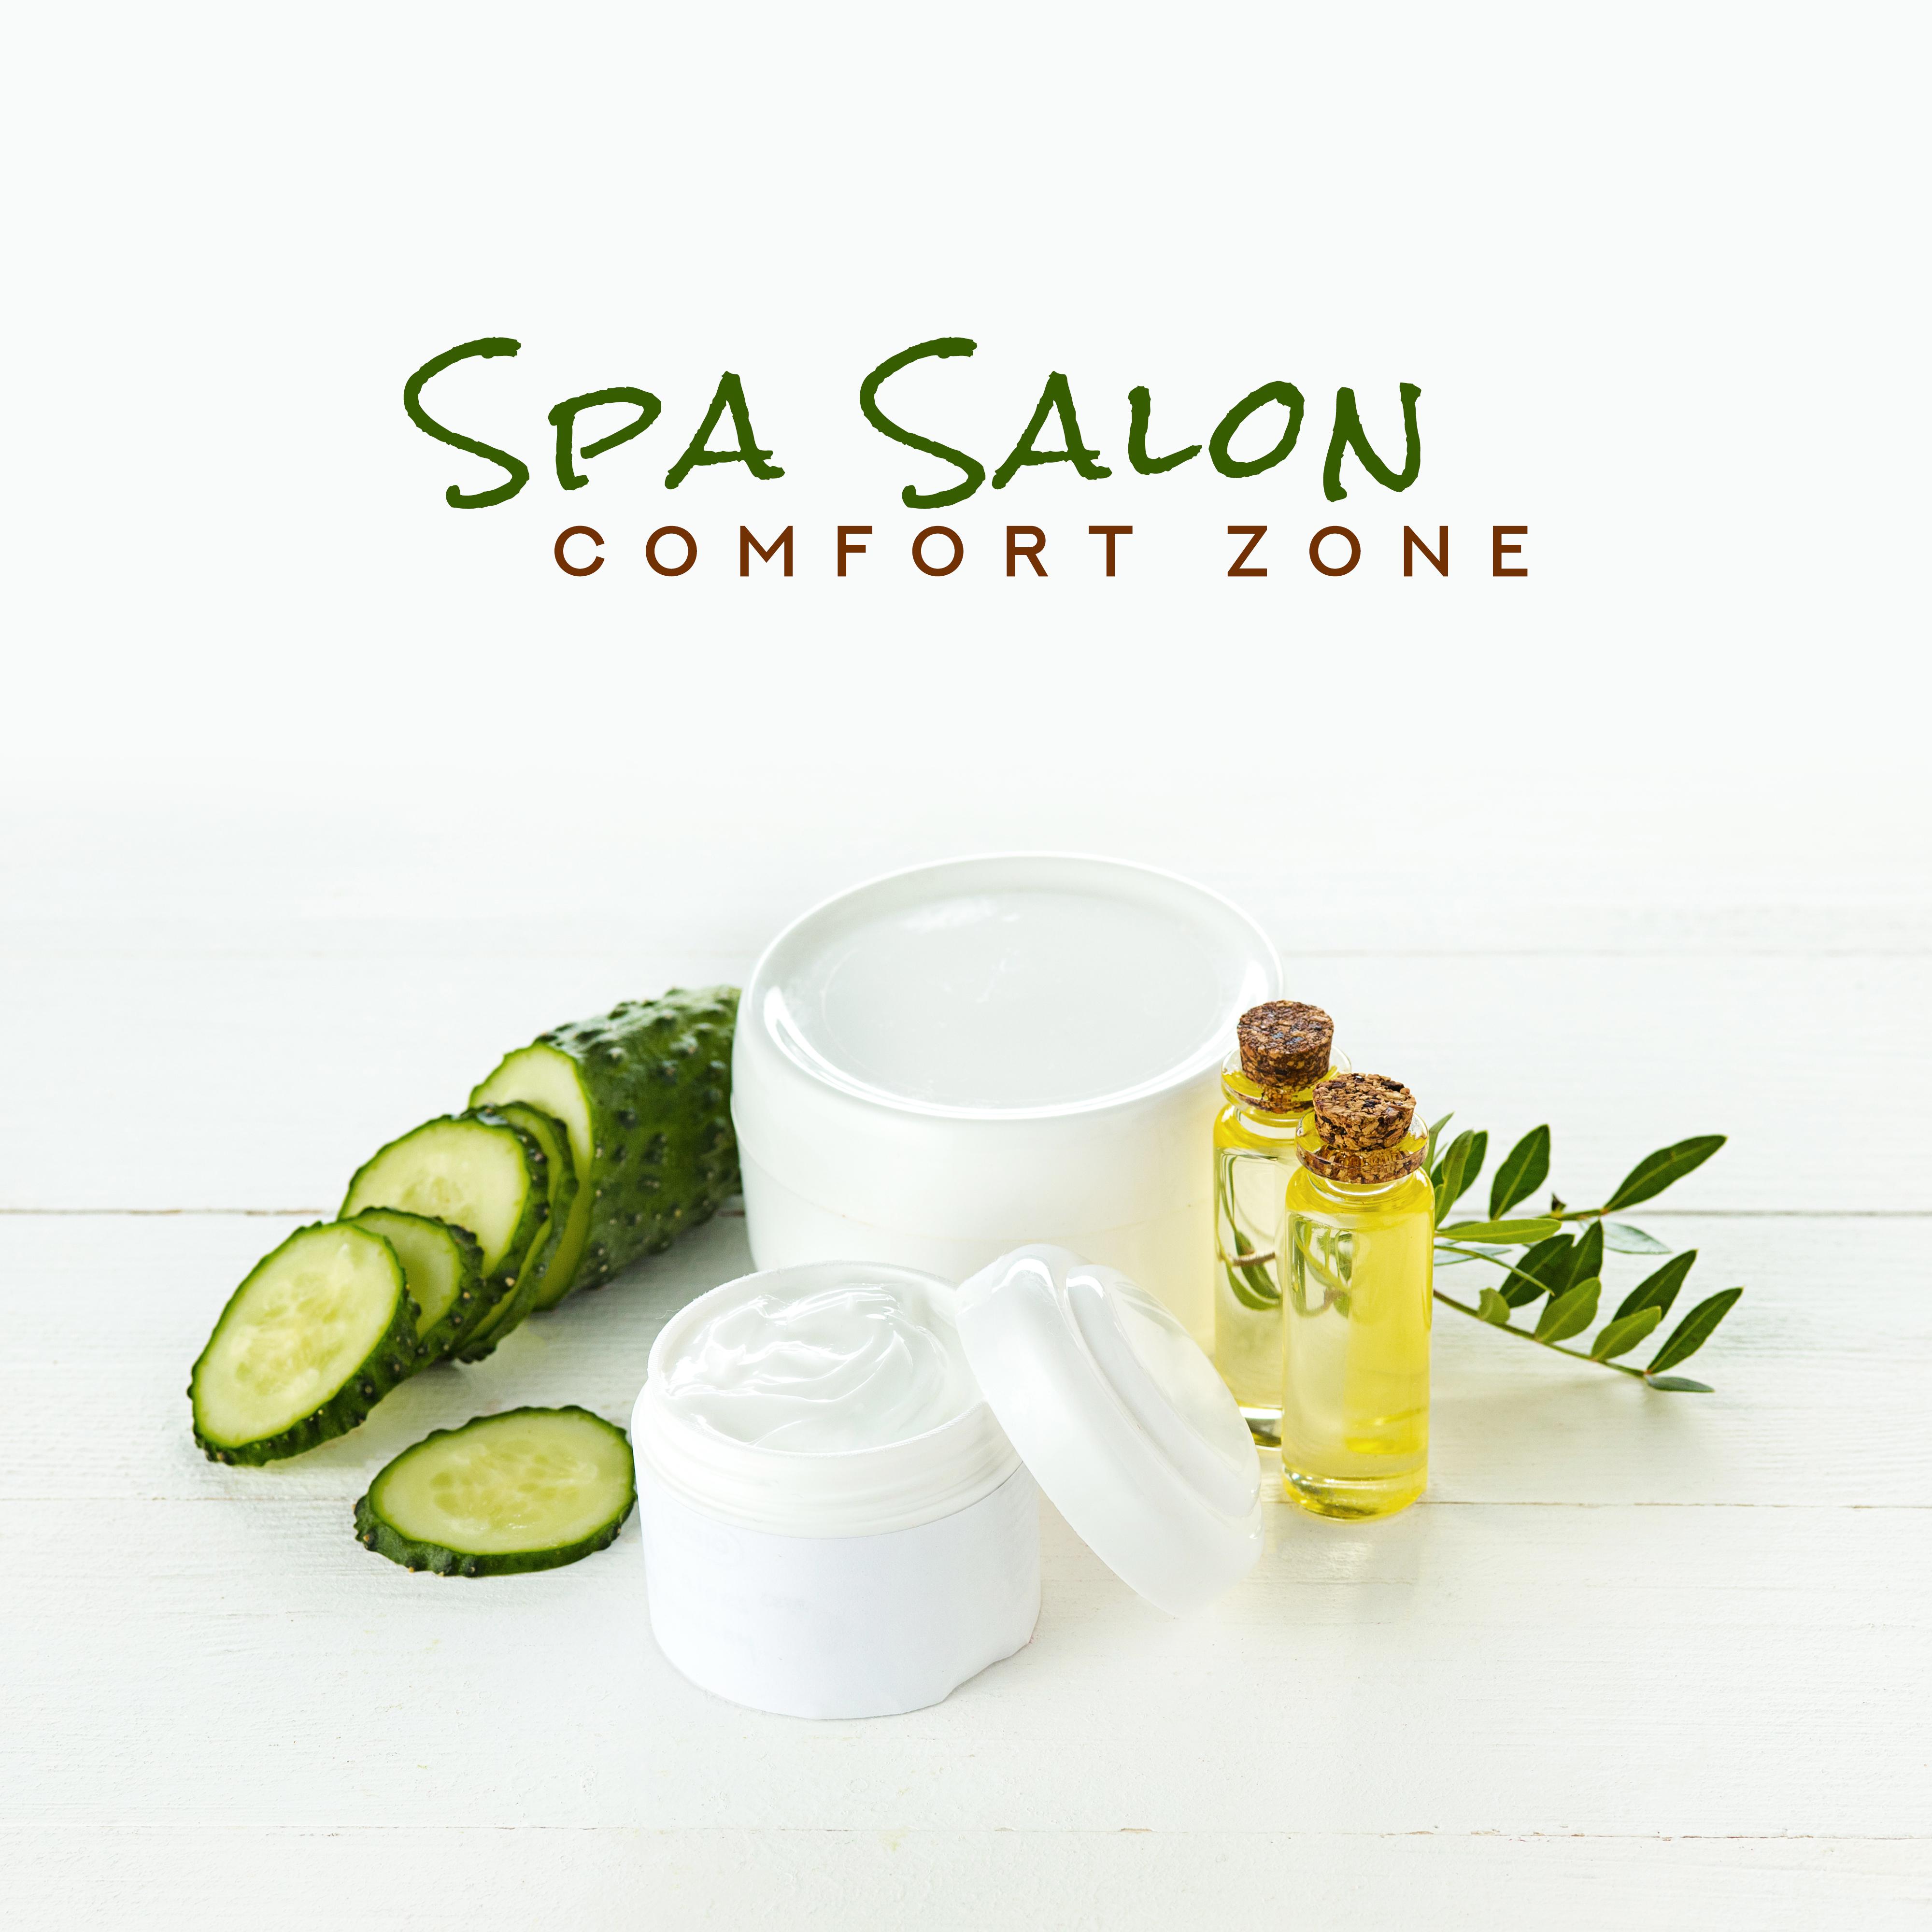 Spa Salon Comfort Zone: New Age Delicate Nature 2019 Music for Total Relaxation in Spa & Wellness, Massage Therapy Rest Songs, Piano & Guitar Soothing Melodies